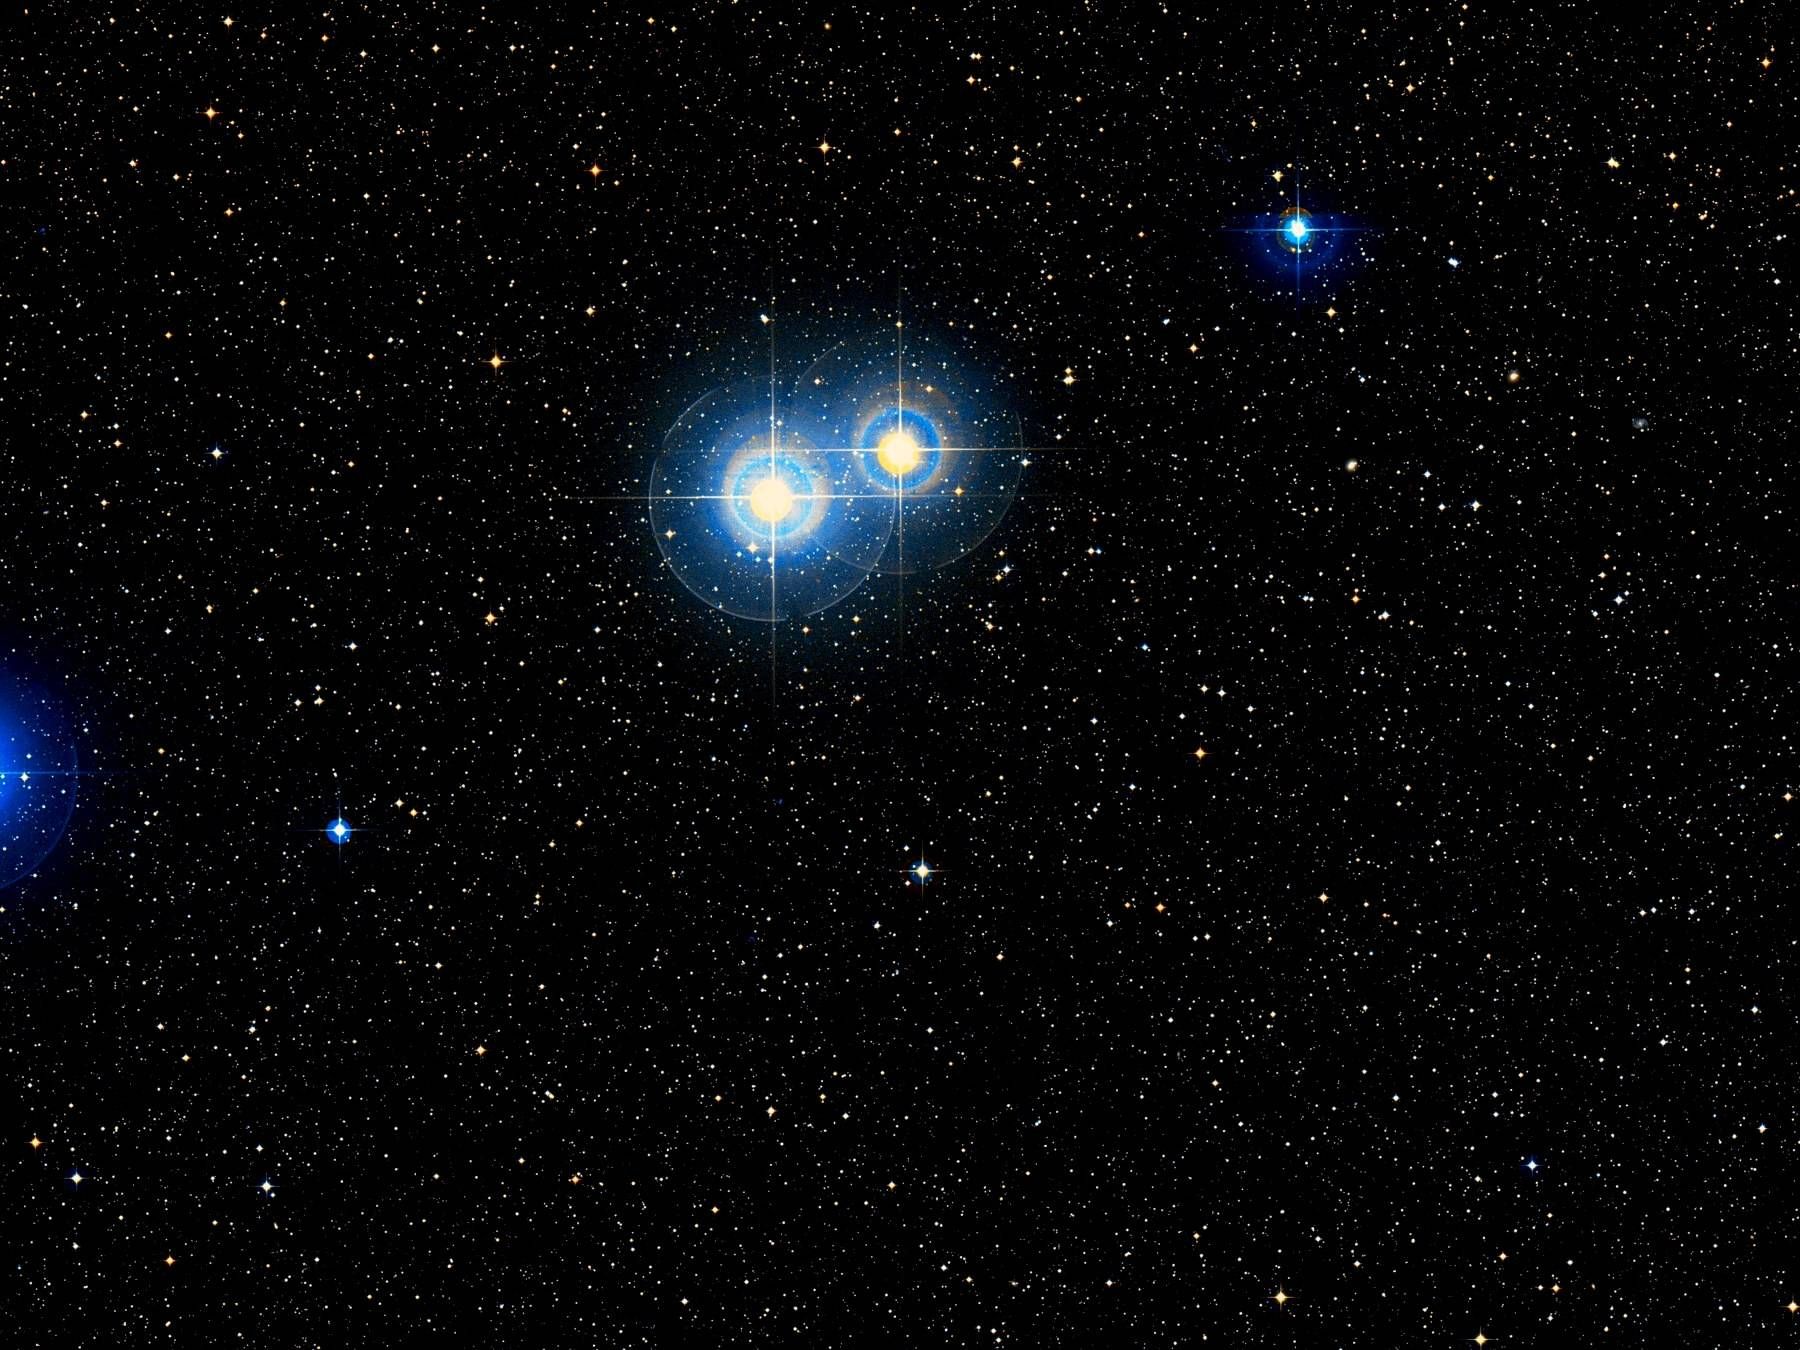 Binary Star HD Wallpaper Image In Collection